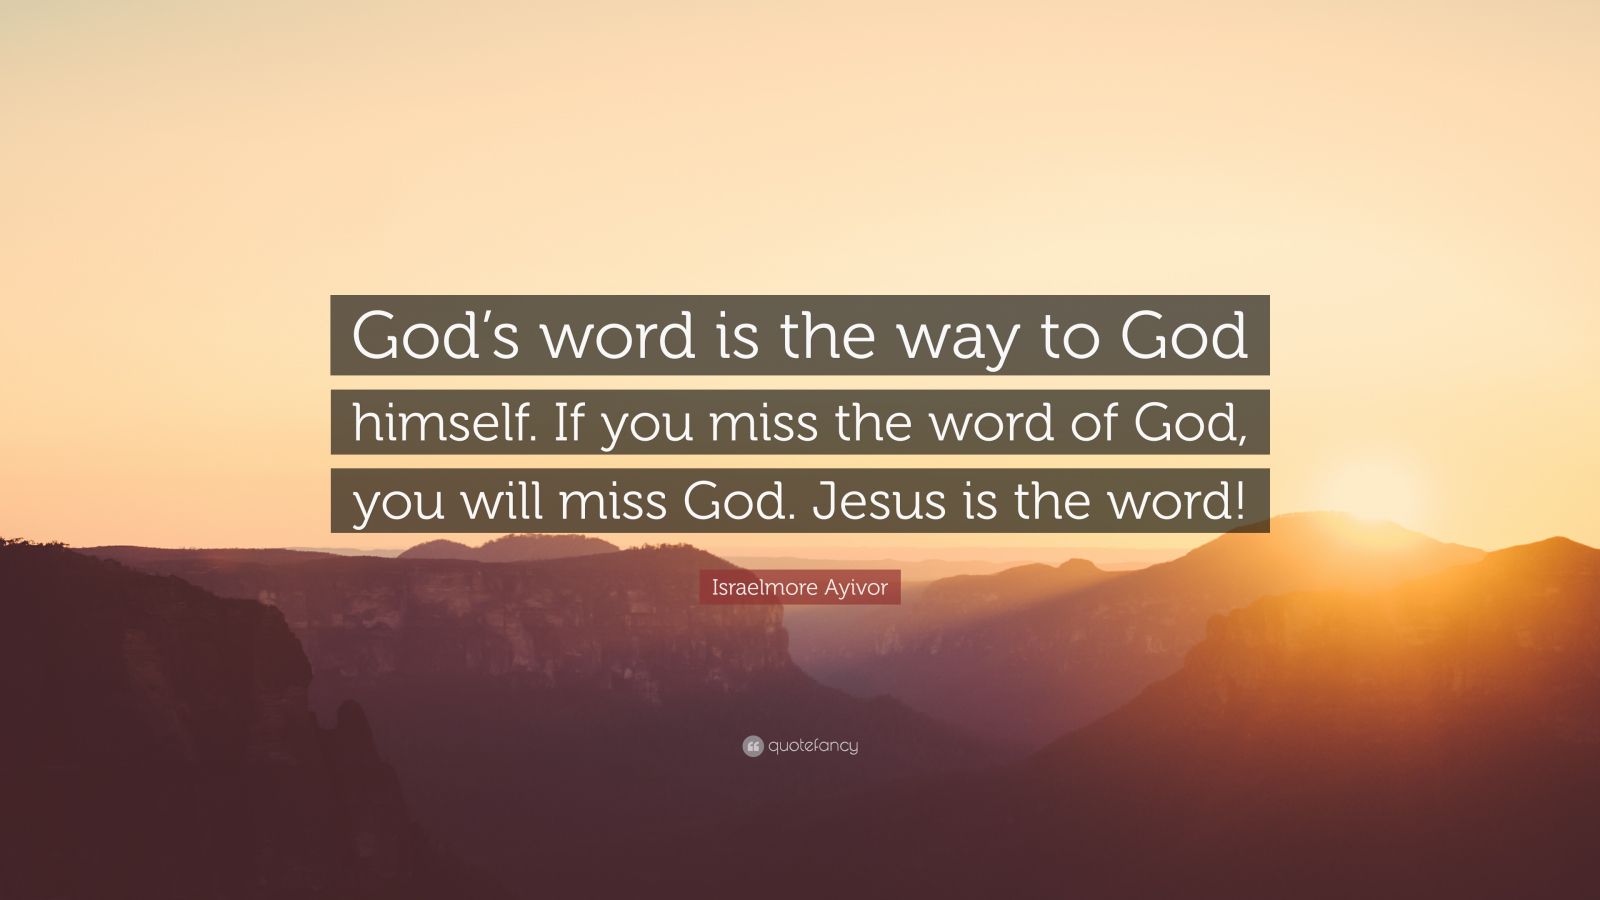 Israelmore Ayivor Quote: “God’s word is the way to God himself. If you ...